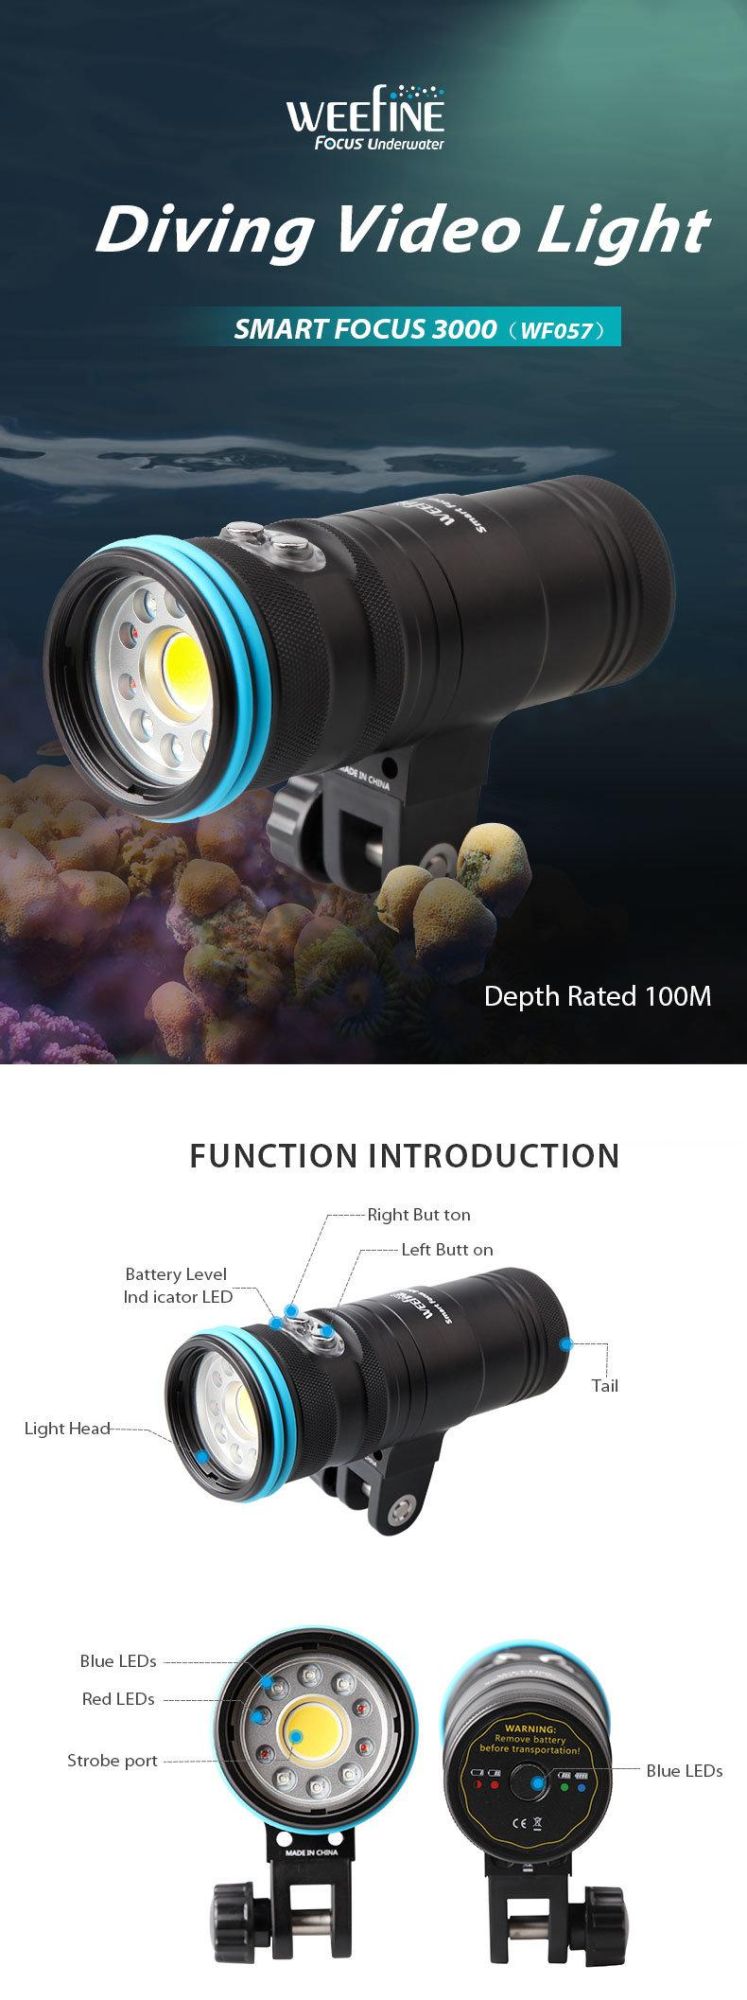 Snorkeling Gear Diving Light Equipment with a Kicker Be Used as Afo Spotting Light